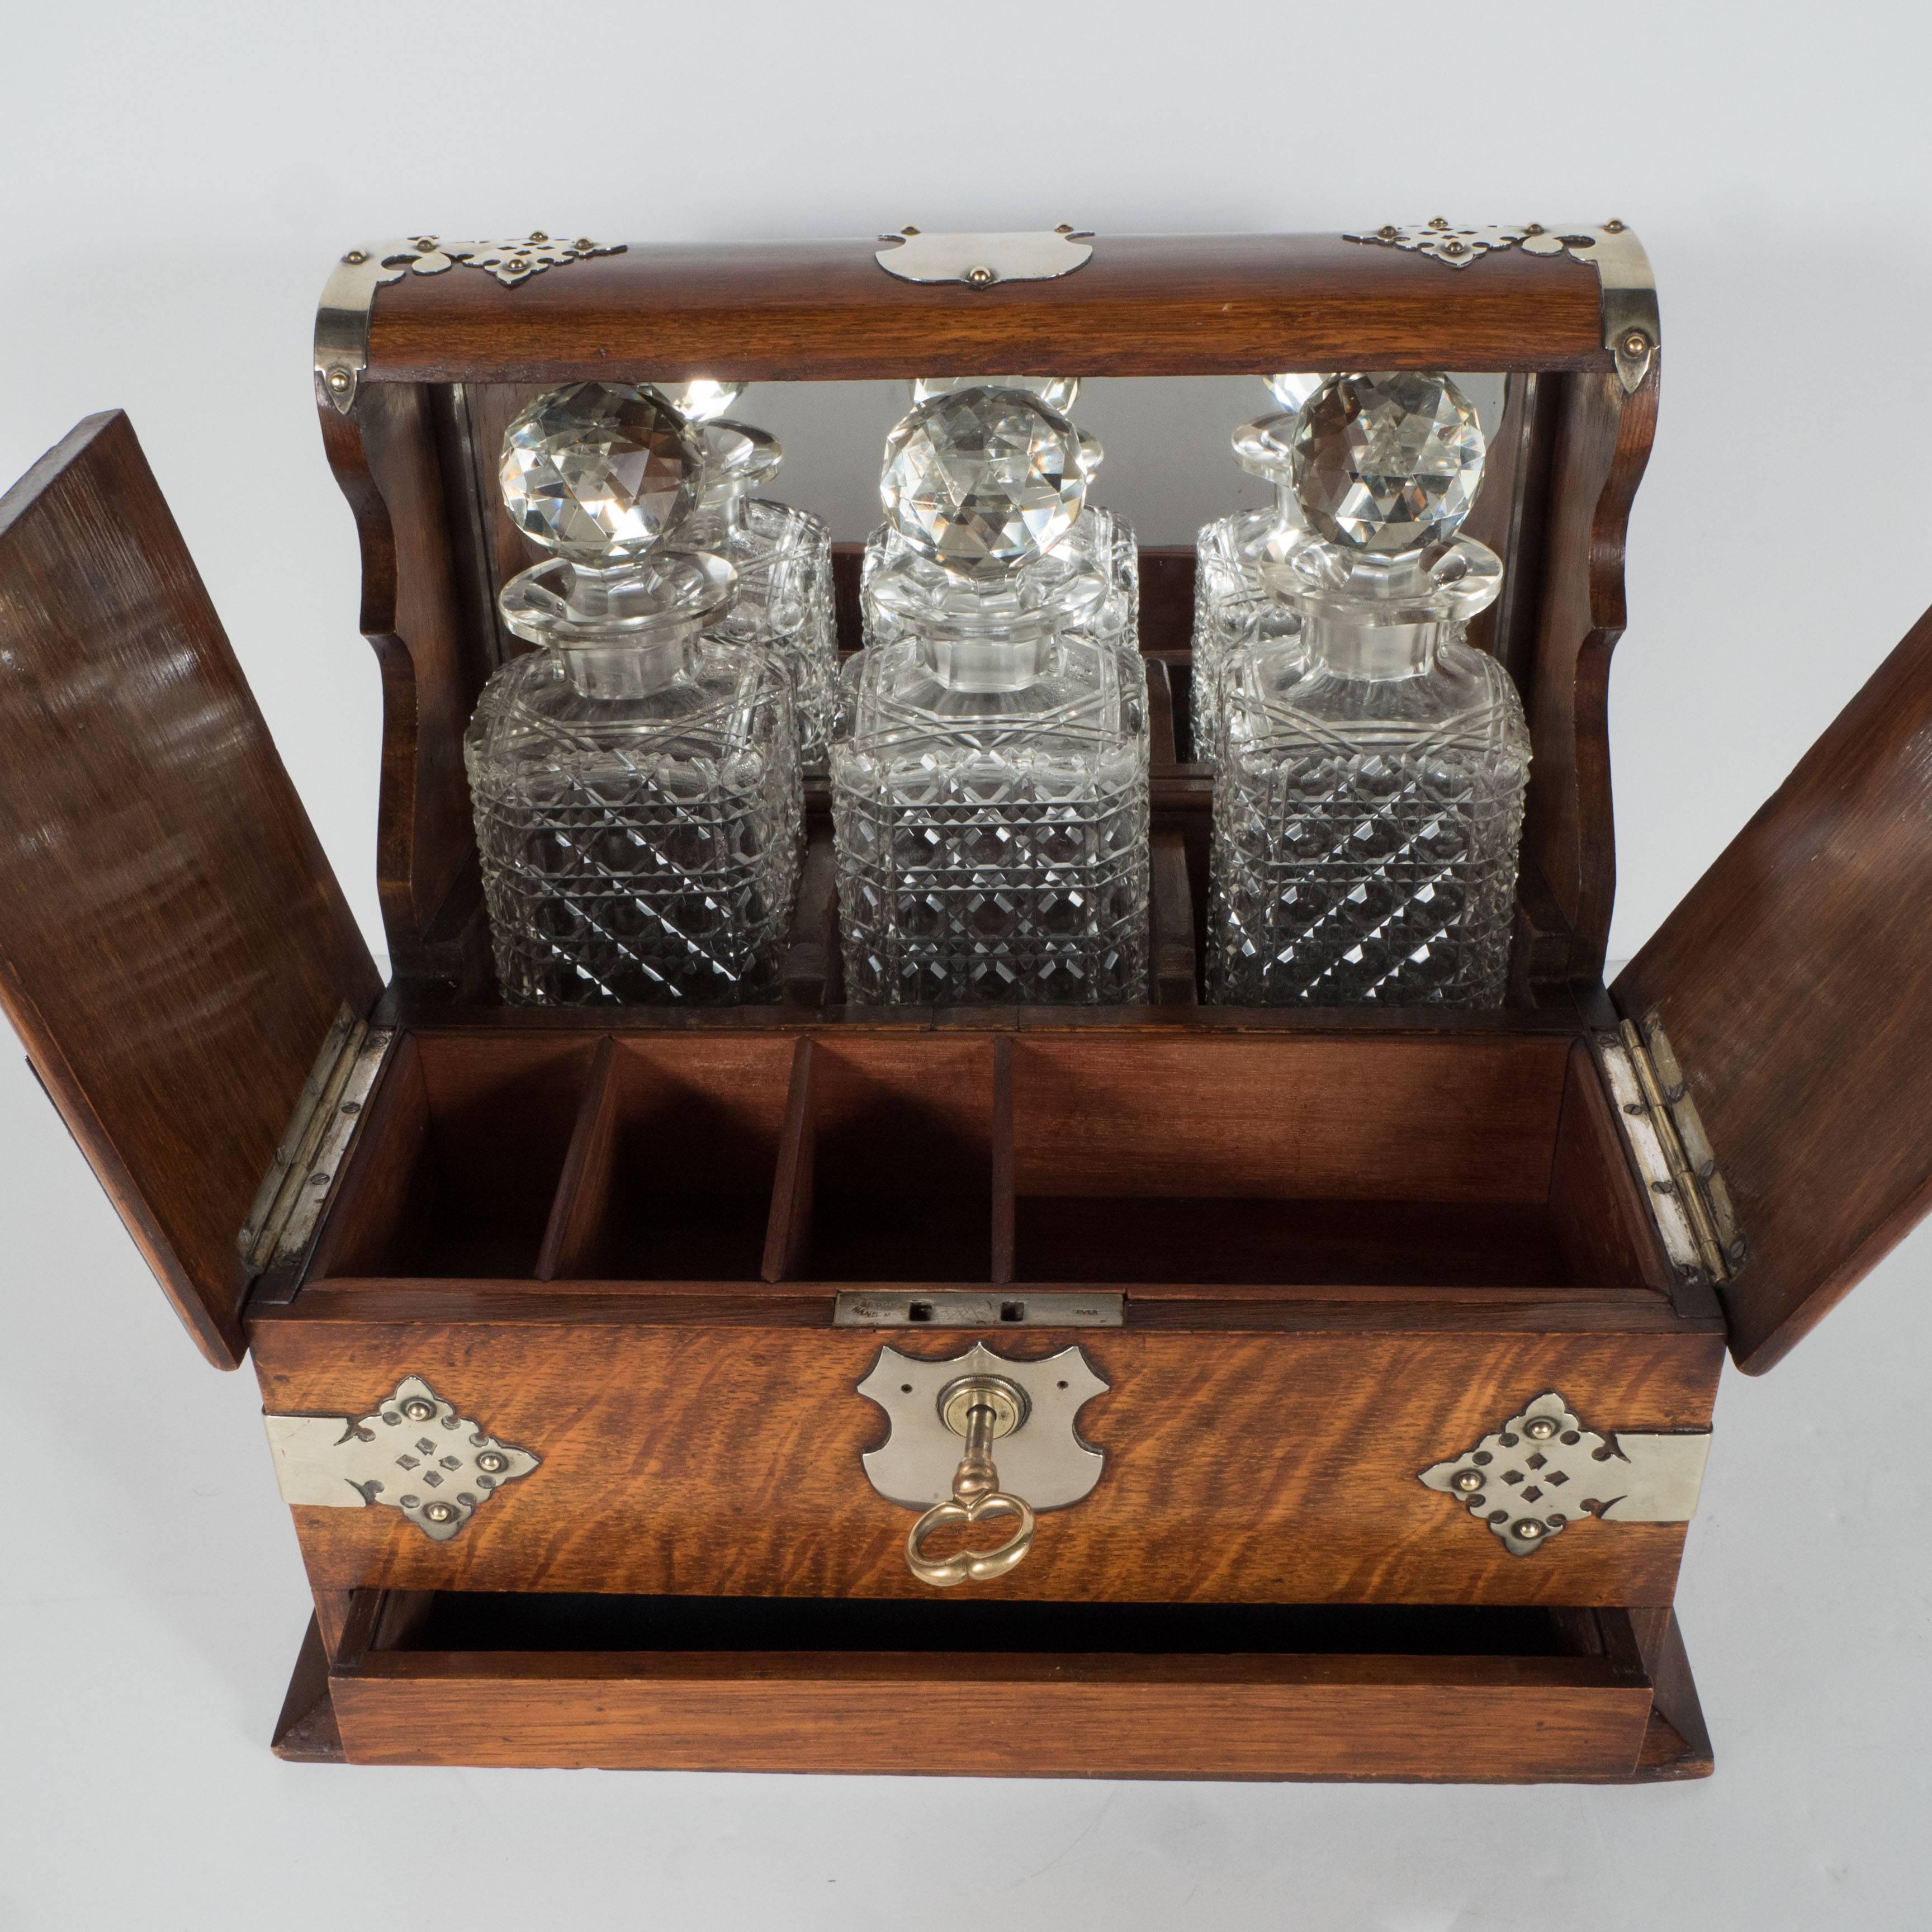 English Victorian Silver Plate Mounted Golden Oak and Cut-Glass Tantalus/Decanter Box